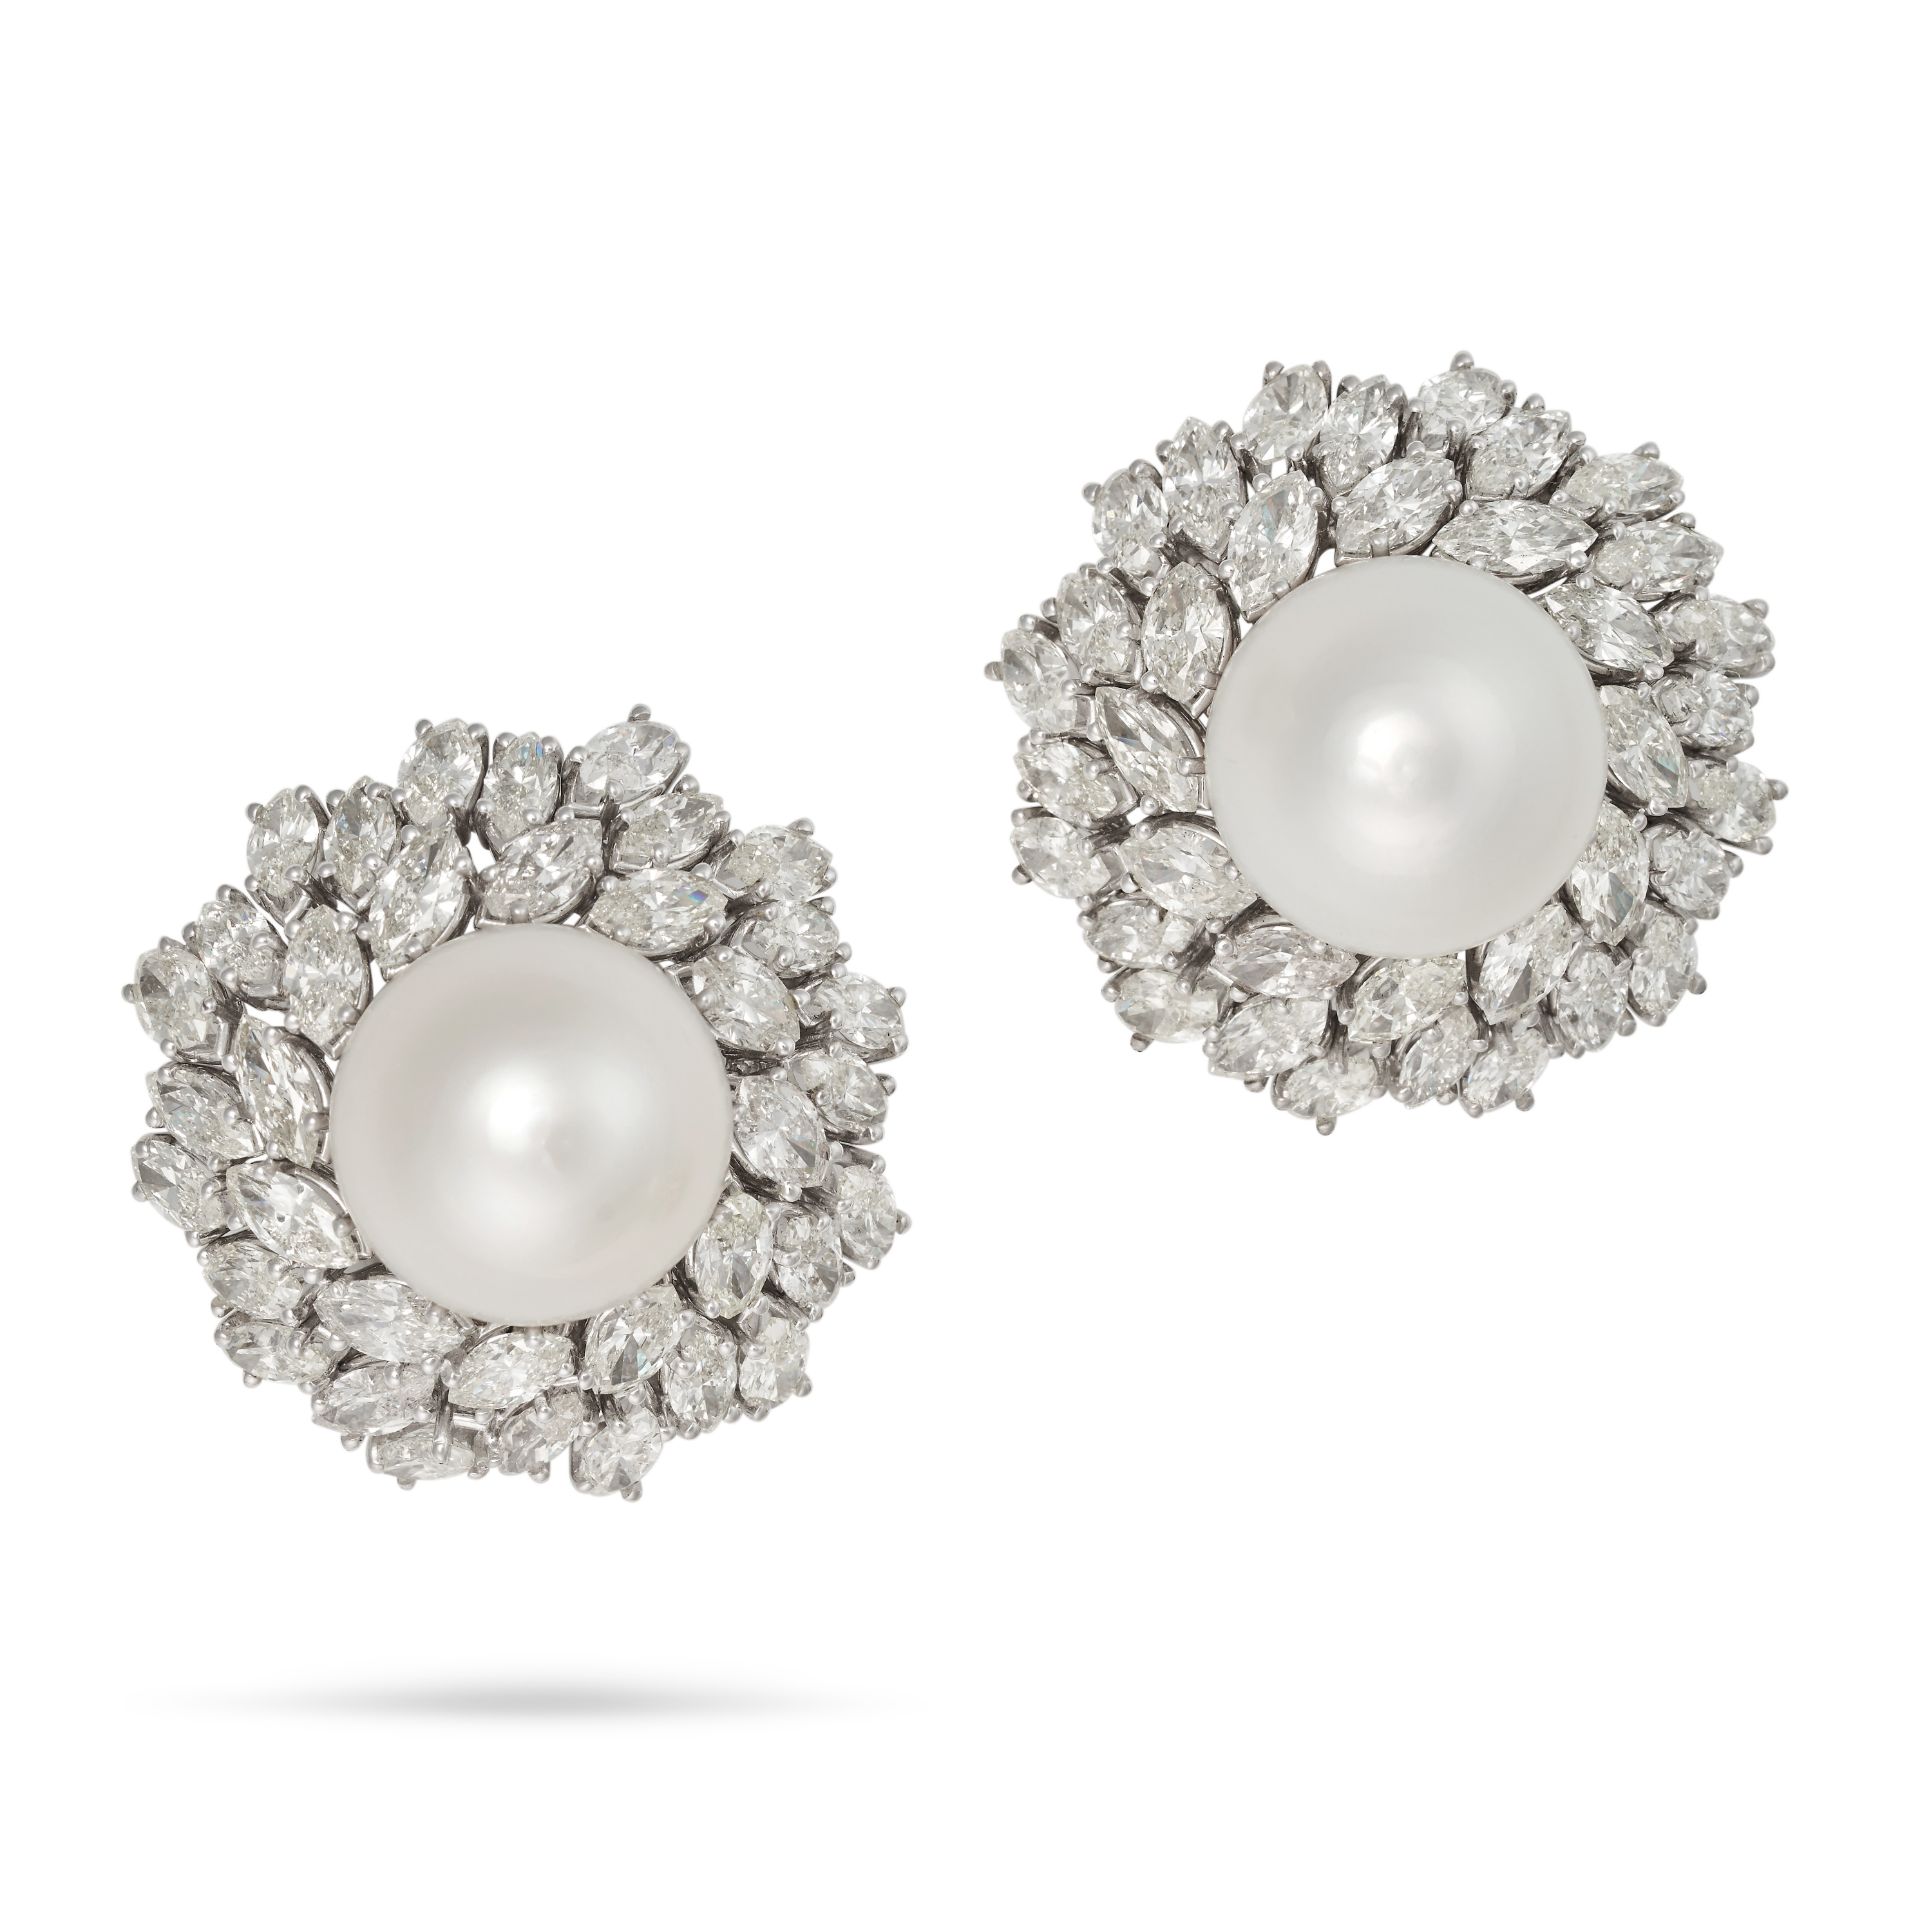 VAN CLEEF & ARPELS, A PAIR OF PEARL AND DIAMOND CLUSTER EARRINGS each set with a pearl of 15.5mm ...